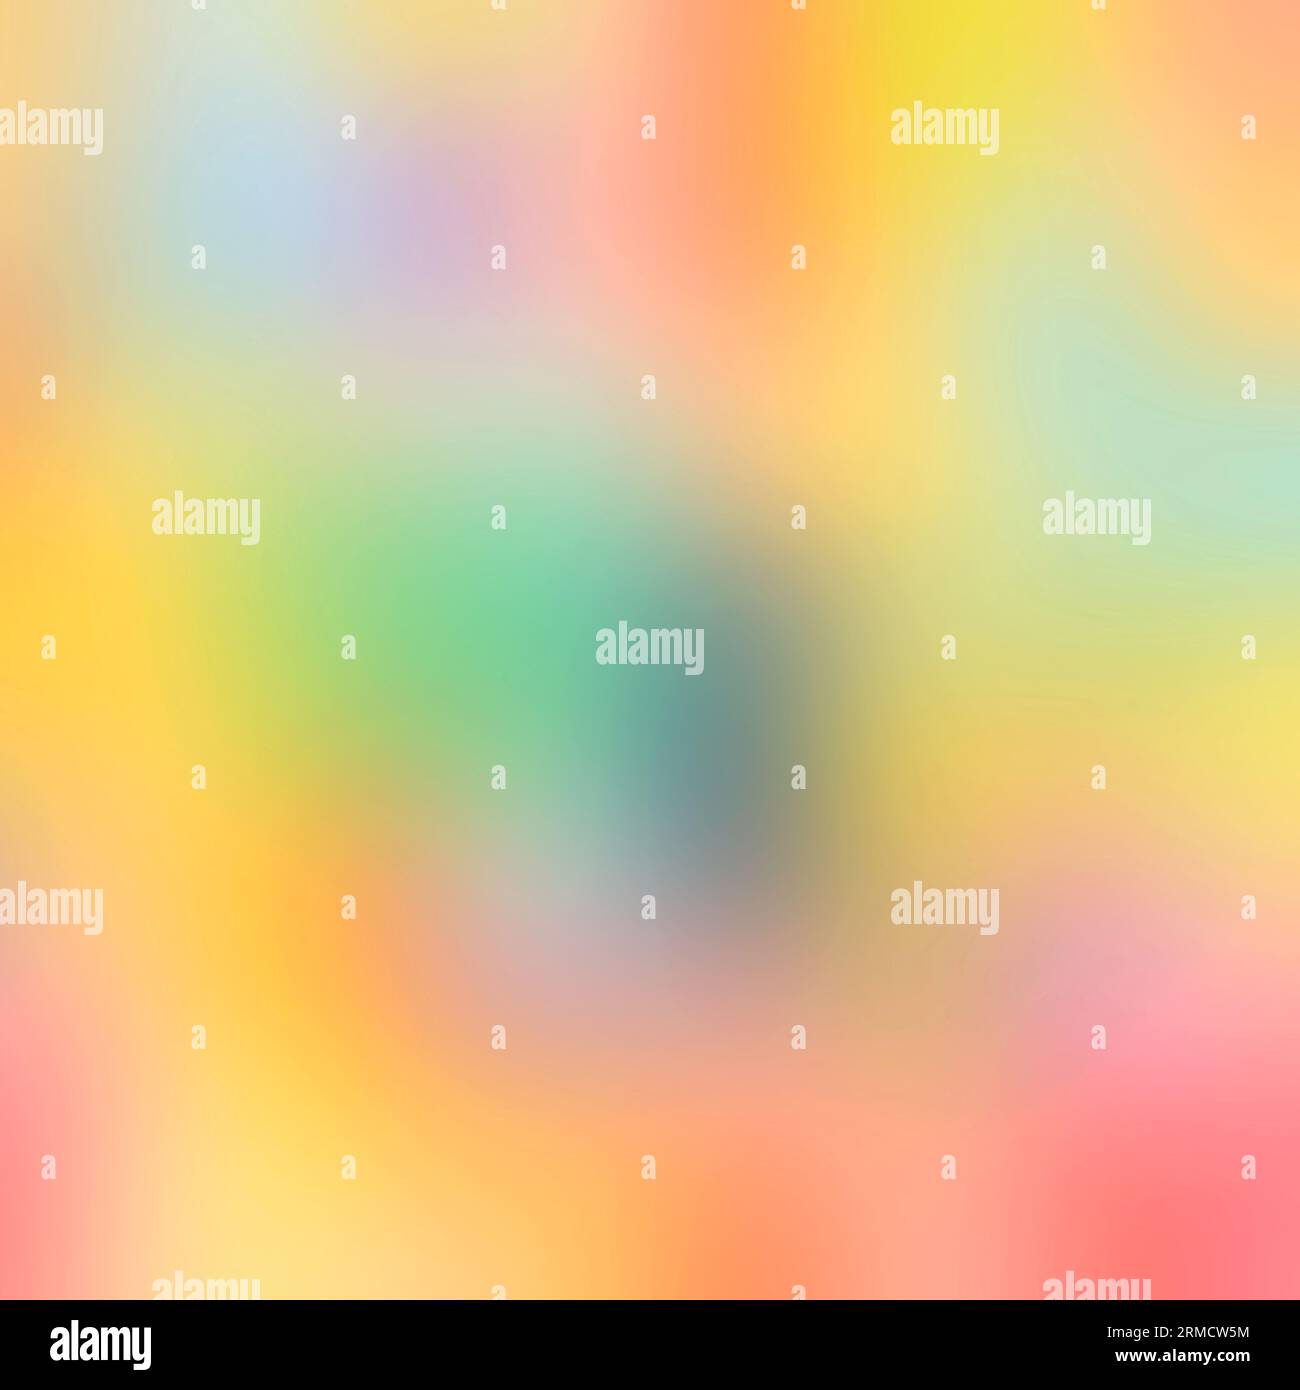 Colors of happiness, fun, bright, cheerful, exhilarating. Abstract blurred vivid colorful background. Stock Photo